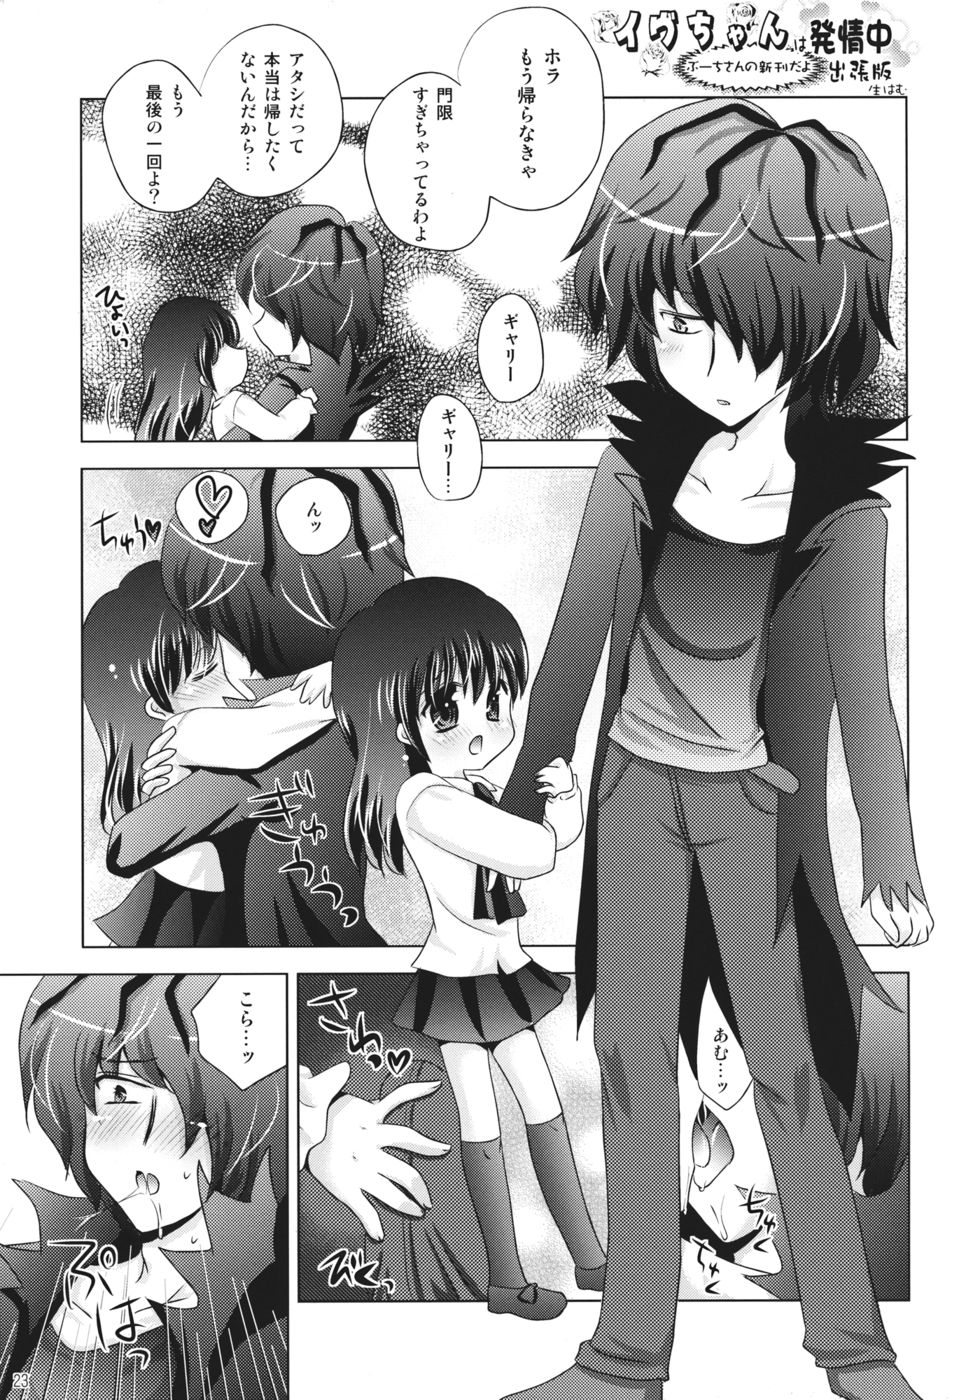 Hentai Manga Comic-What happens when you're in a bath together, Garry and Ib?-Read-22